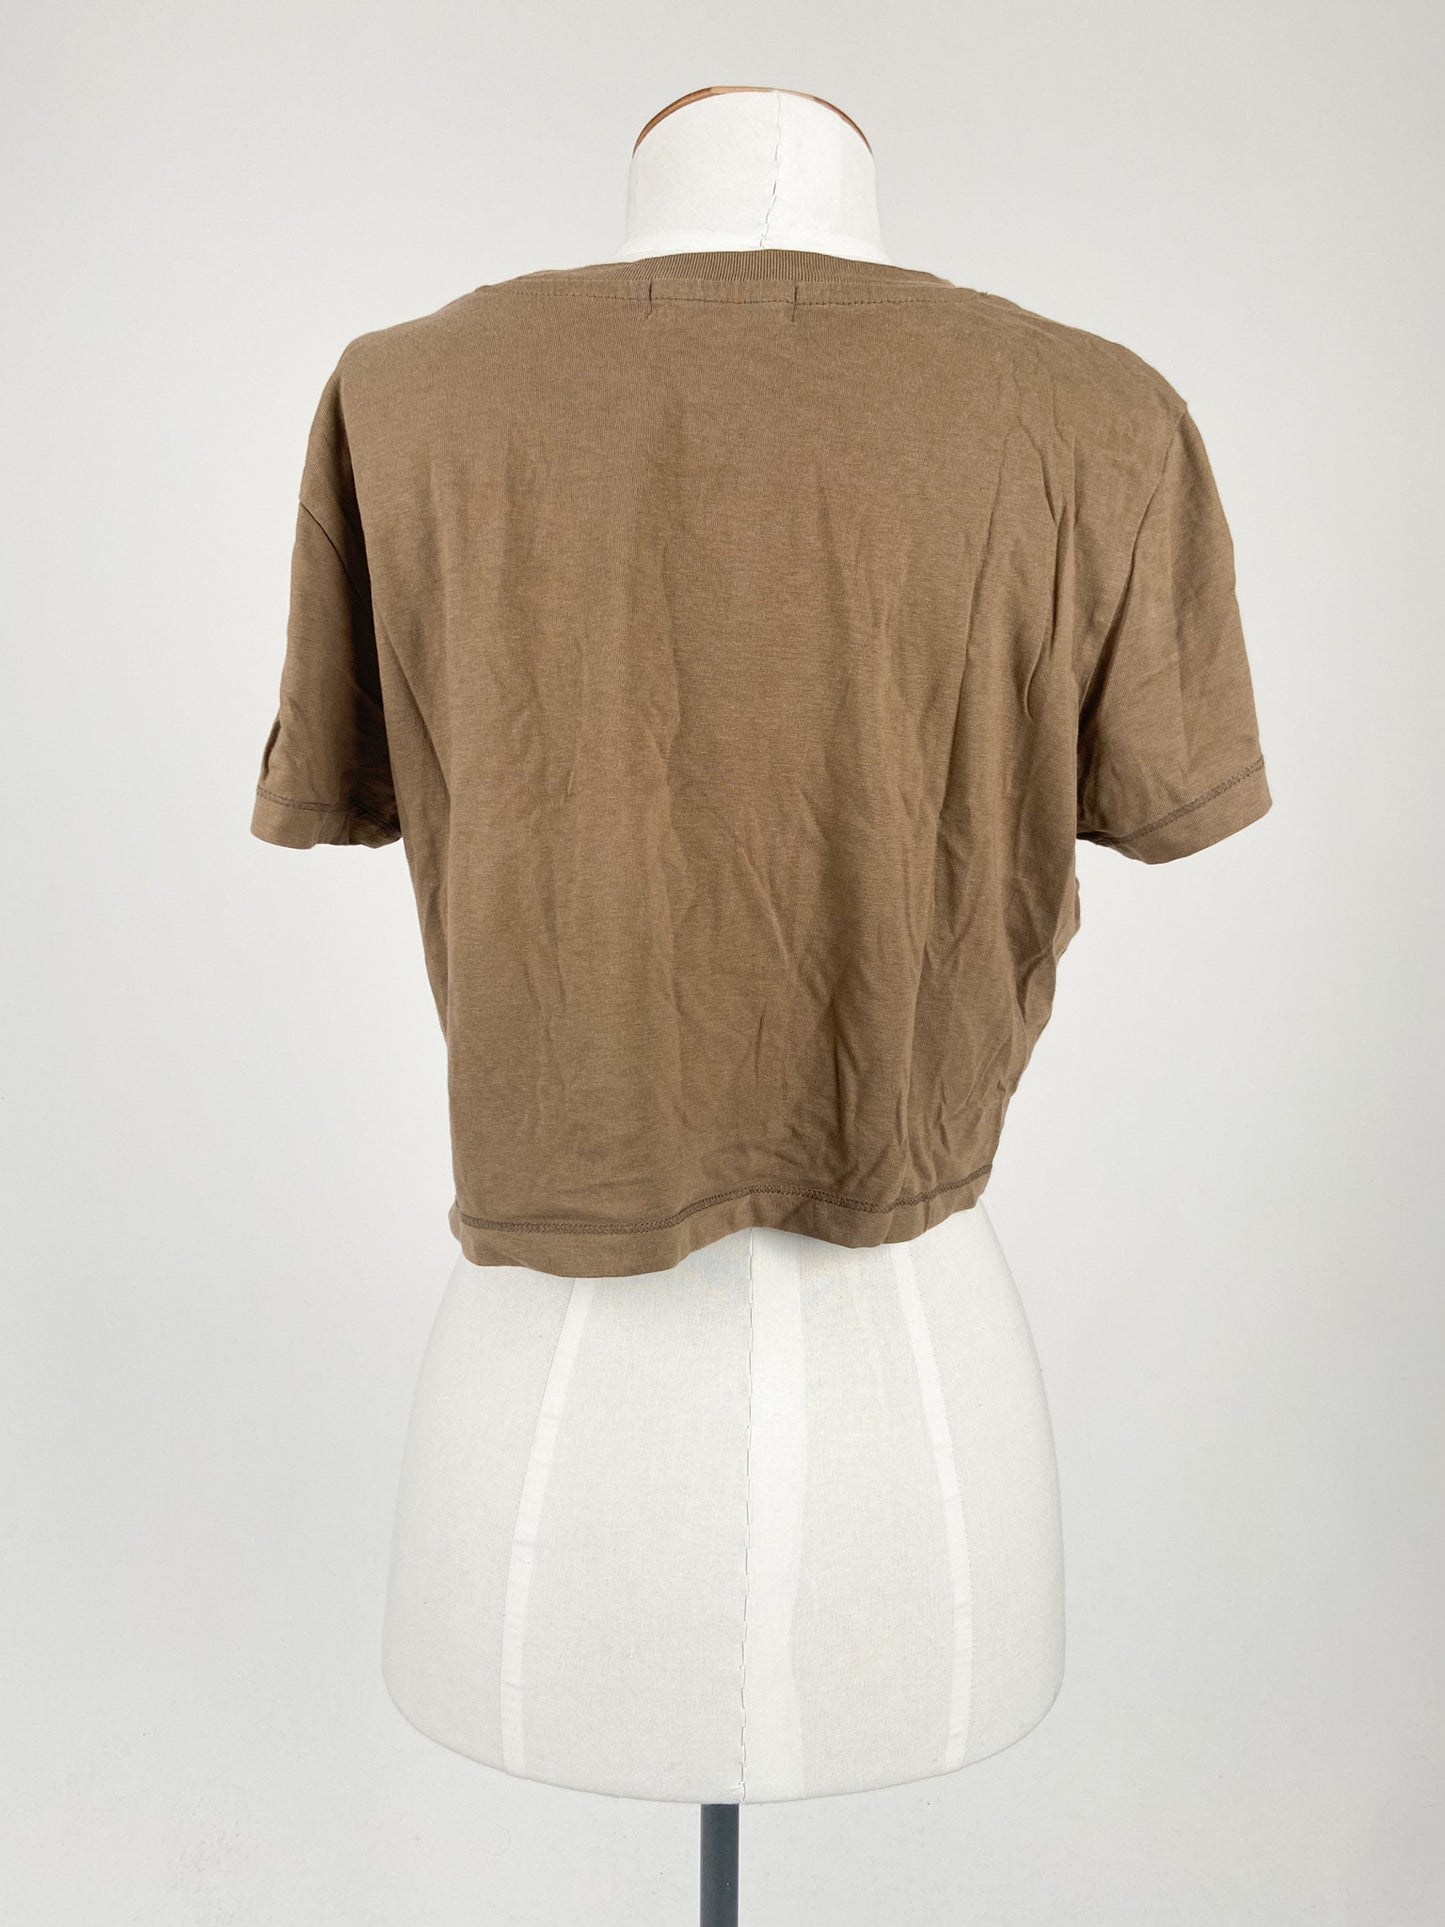 Cotton On | Brown Casual Top | Size M